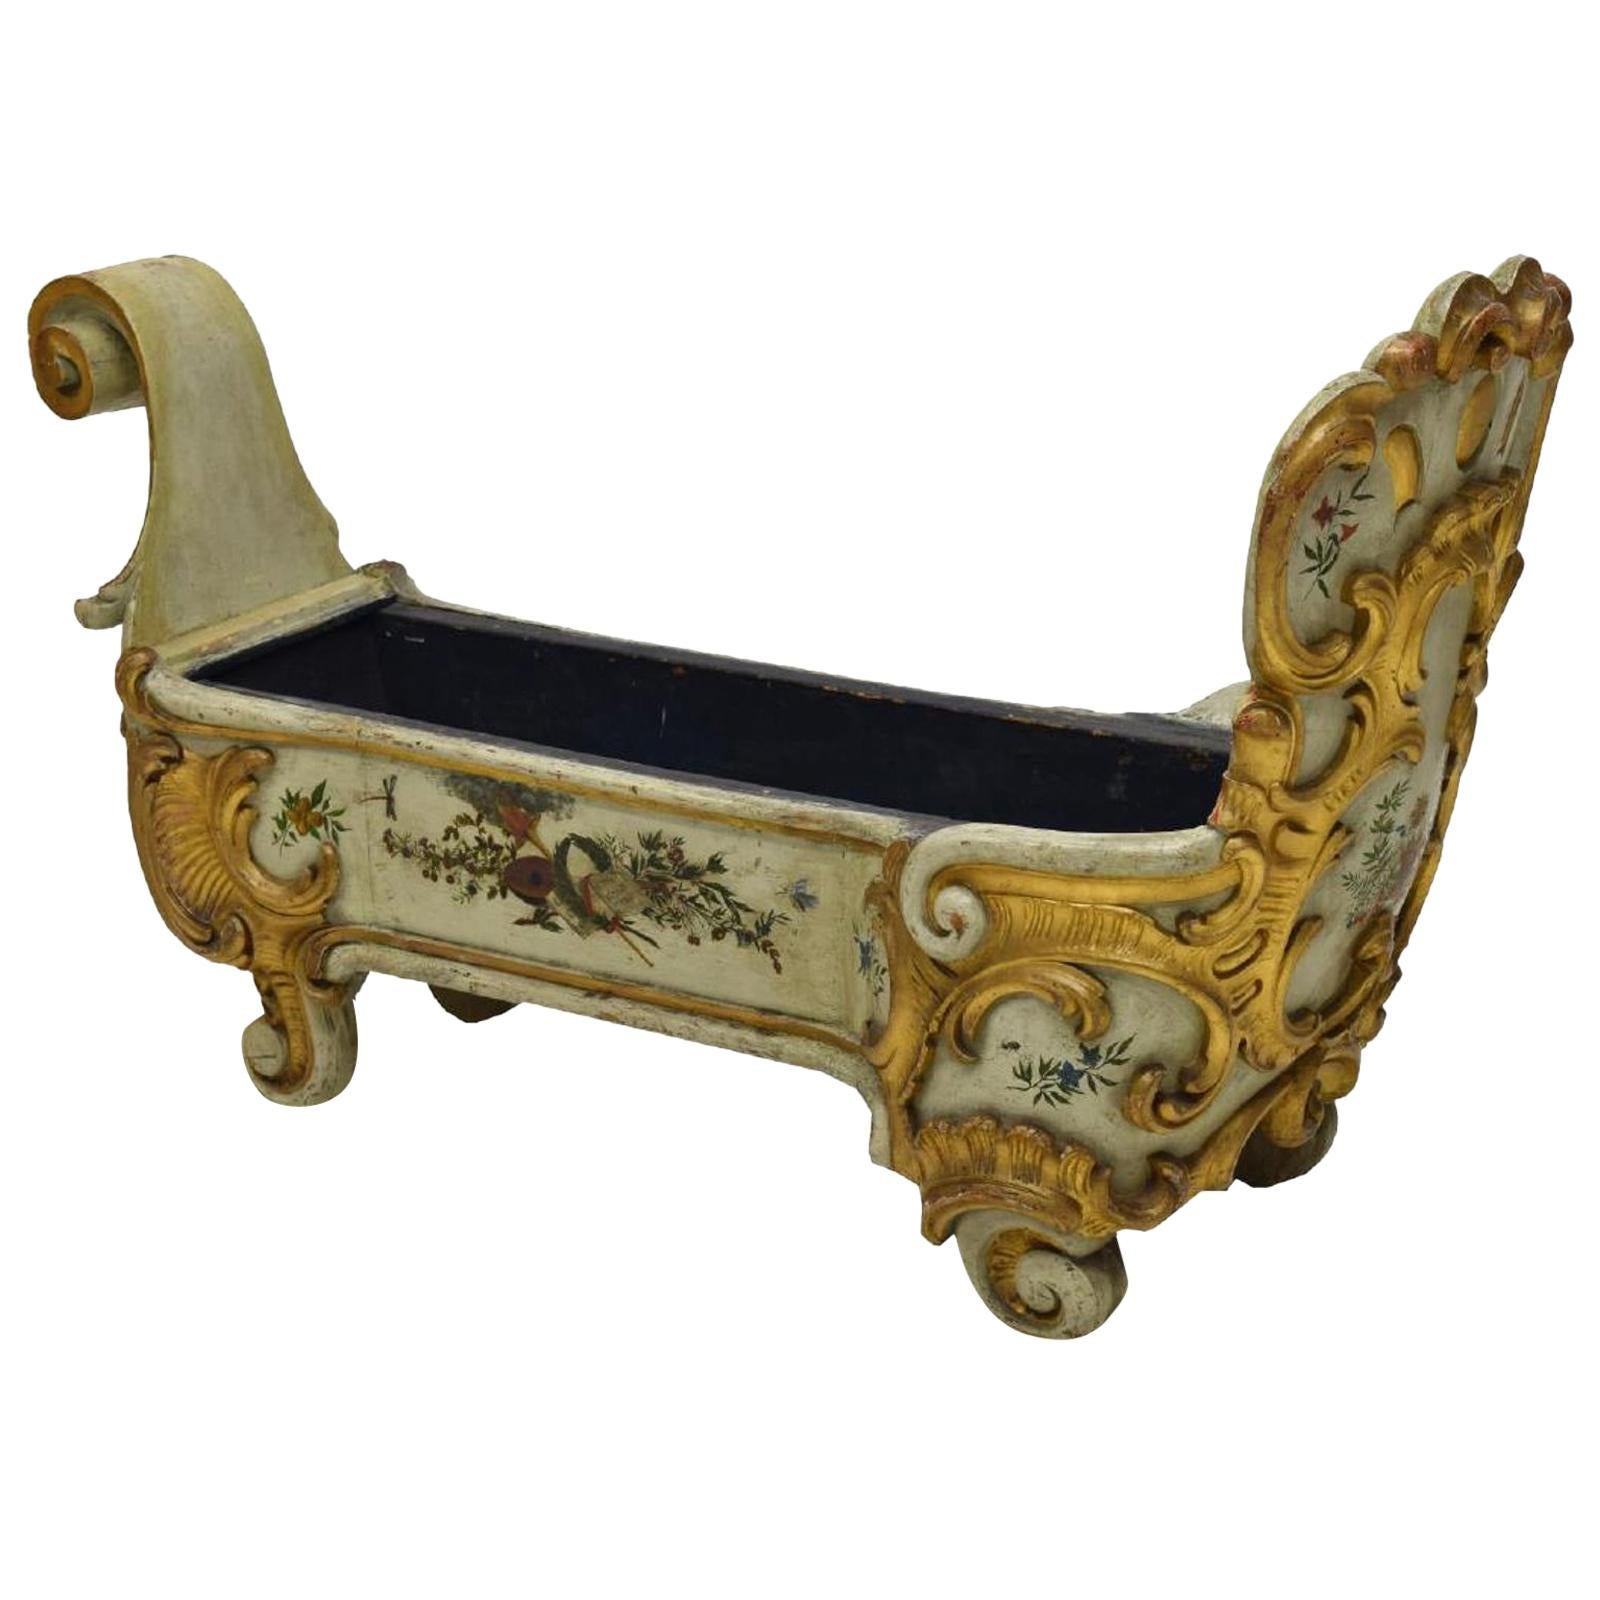 Italian Painted and Parcel-Gilt Planter, 19th Century